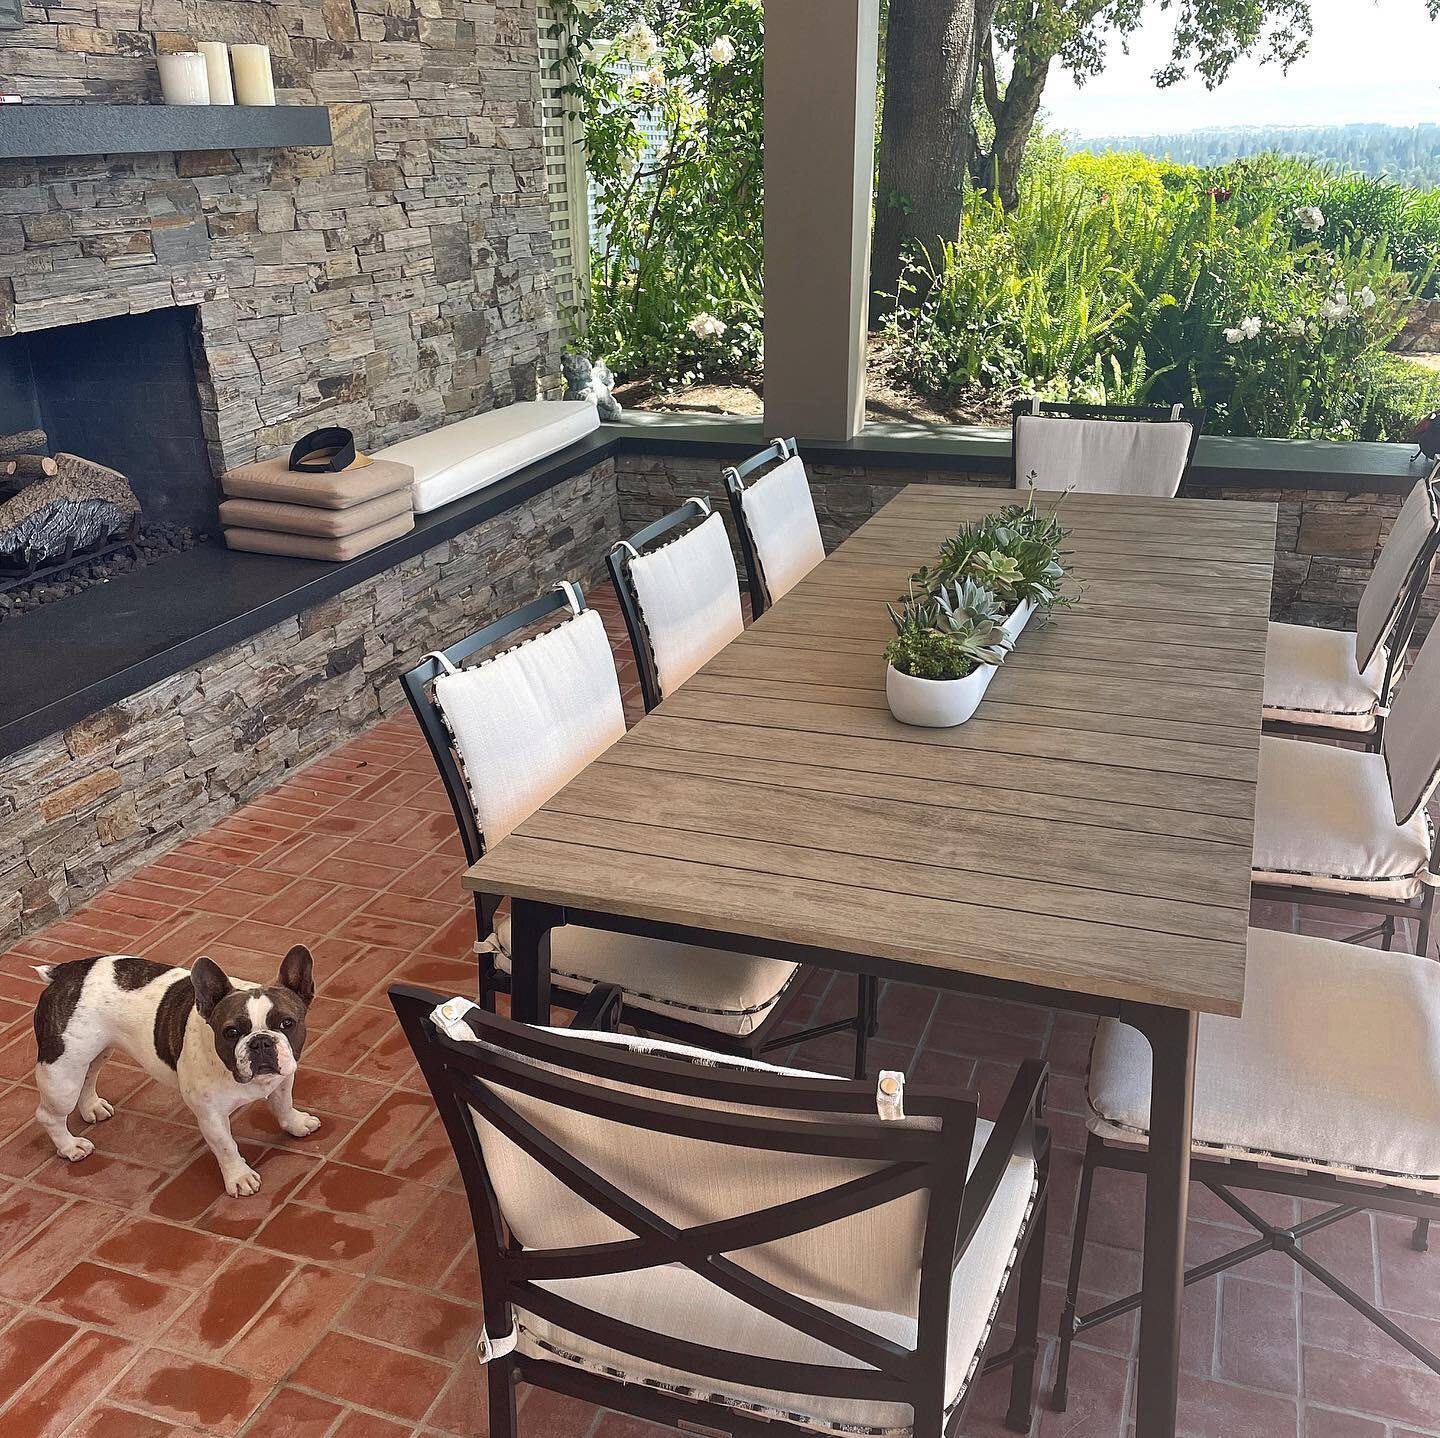 Delivered just in time for this pup &amp; her family to enjoy for Memorial Day Weekend 🇺🇸 

Beautiful new @brownjordan1945 teak table and dining chairs with contrast welt. 

#brownjordan #outdoorliving #teak #puppylove #memorialdayweekend #derbymen